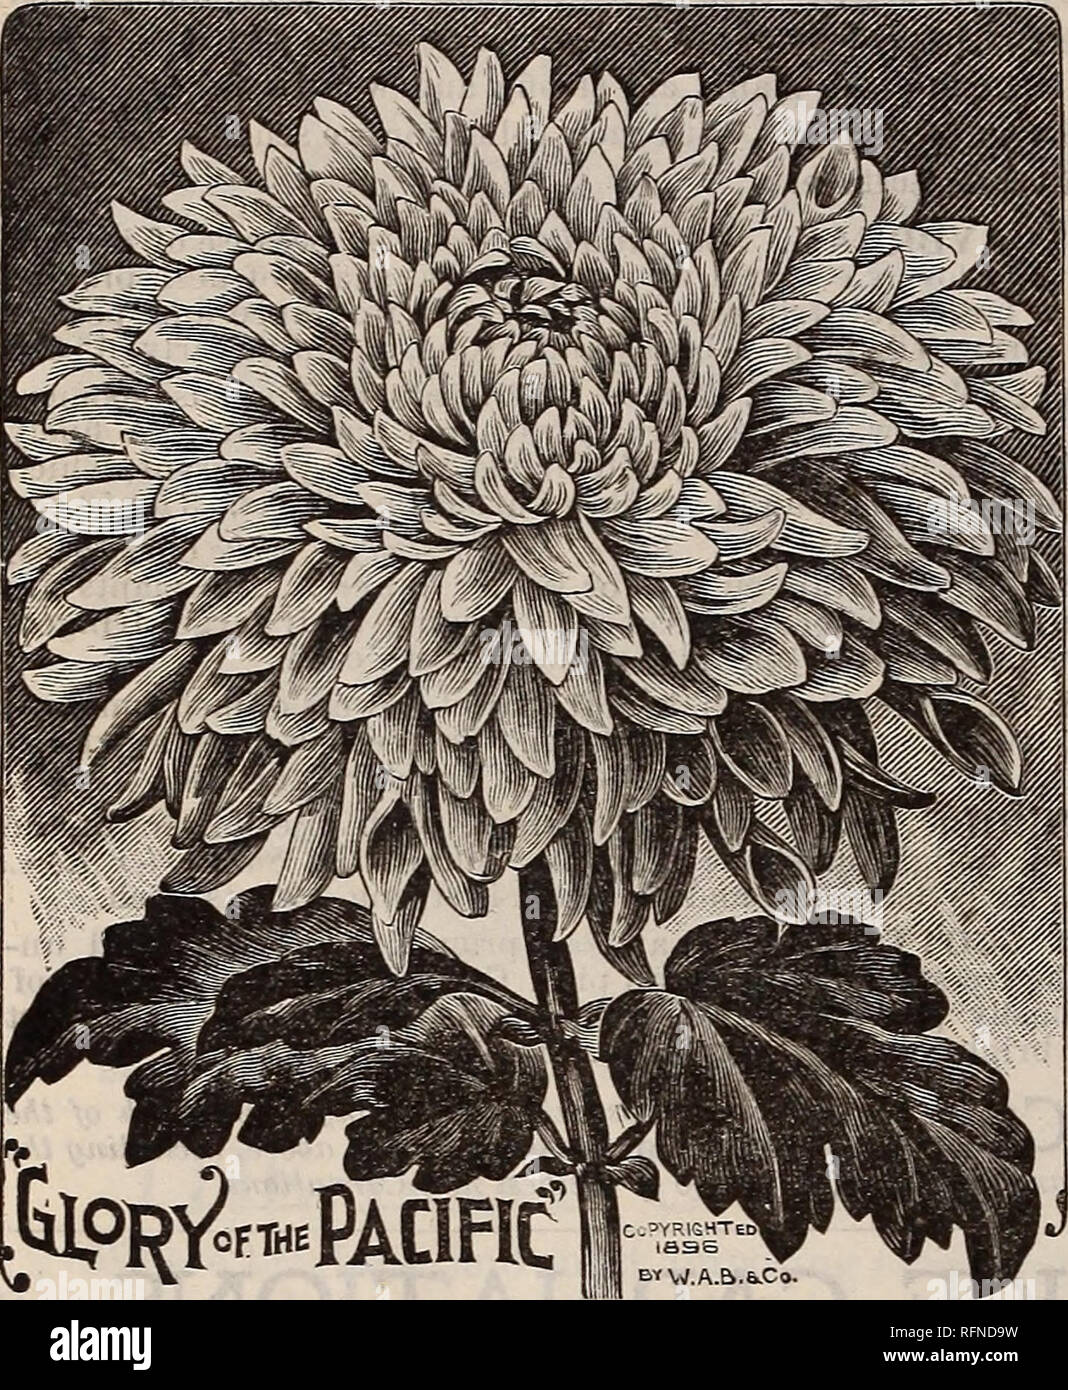 . Burpee's farm annual written at Fordhook Farm. Nurseries (Horticulture) Pennsylvania Philadelphia Catalogs; Vegetables Seeds Catalogs; Plants, Ornamental Catalogs; Flowers Seeds Catalogs. 136 W. ATLEE BURPEE &amp; CO., PHILADELPHIA. Six Grand CHRYSANTHEMUMS for 50 Cts. We have grown an ample stock of the following varieties to make possible this UNEQUALED COLLECTION of Six New and Best Chrysanthemums for 50 Cts. GLORY OF THE PACIFIC. For early autumn flowering in the open ground this is the very best pink. The magnificent large flowers have finely reflexed, broad petals, which show the clear Stock Photo